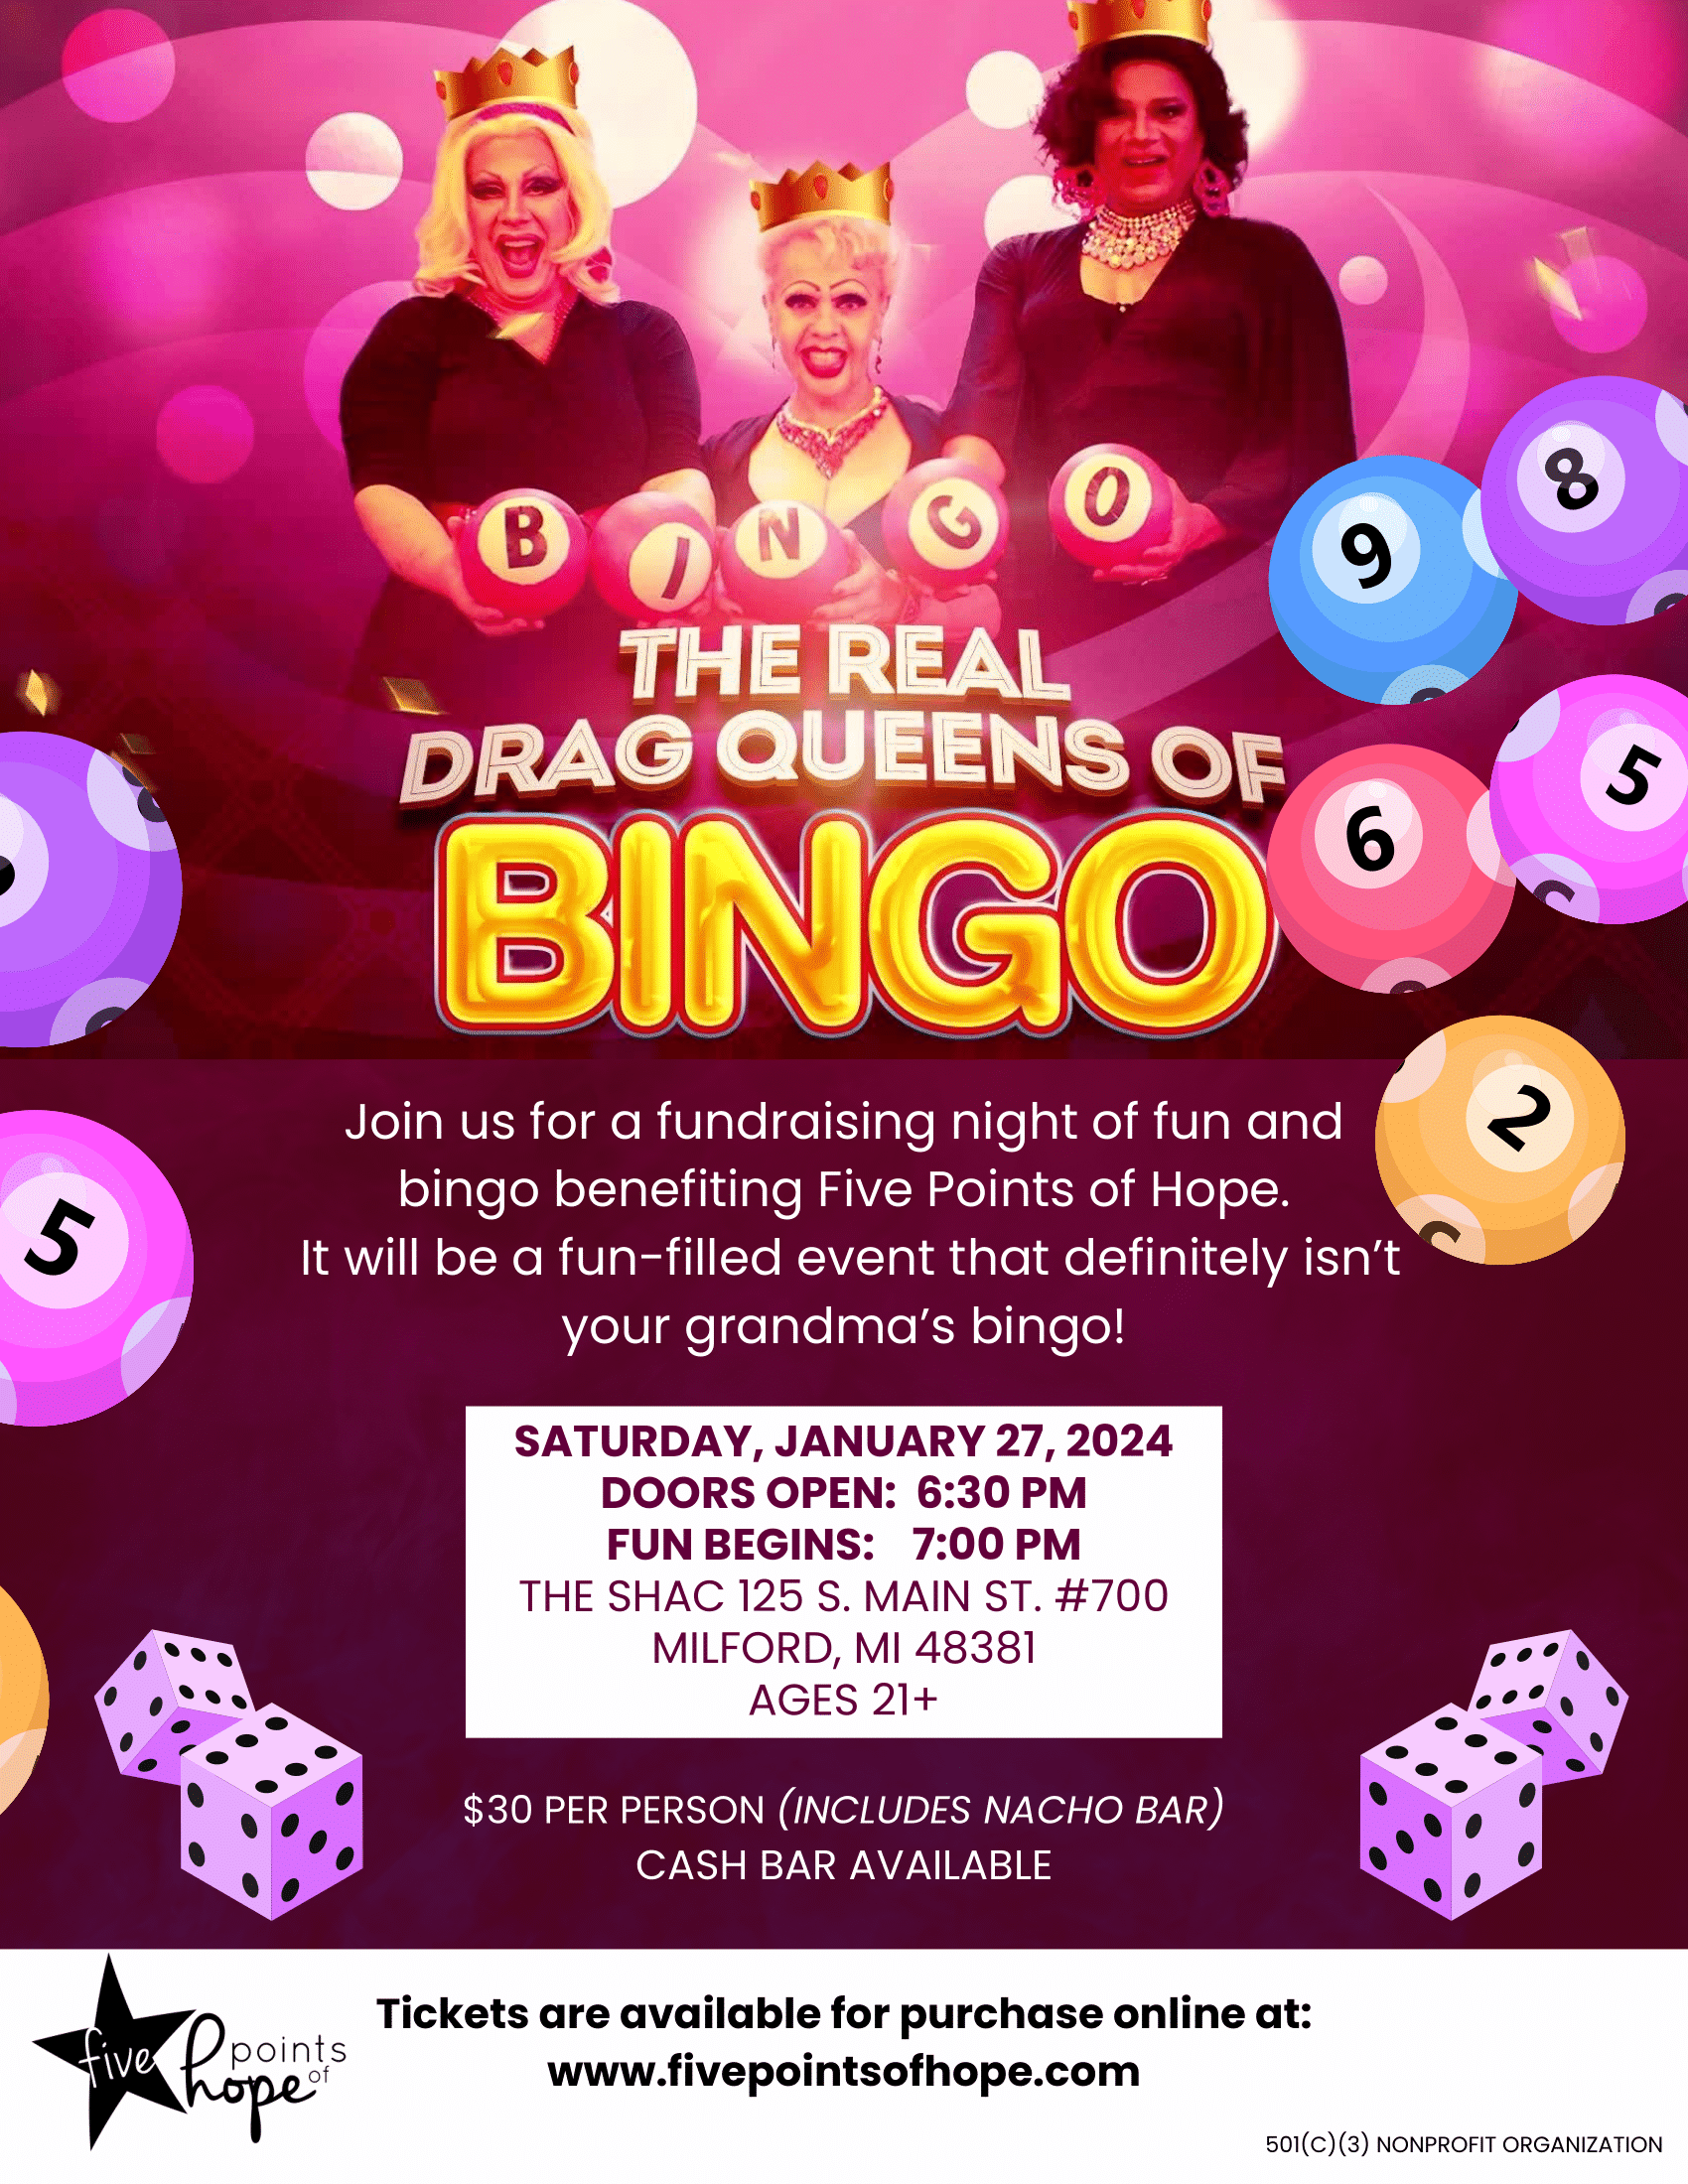 The Real Drag Queens of Bingo 2024 Event is Scheduled for Friday: January 27, 2024